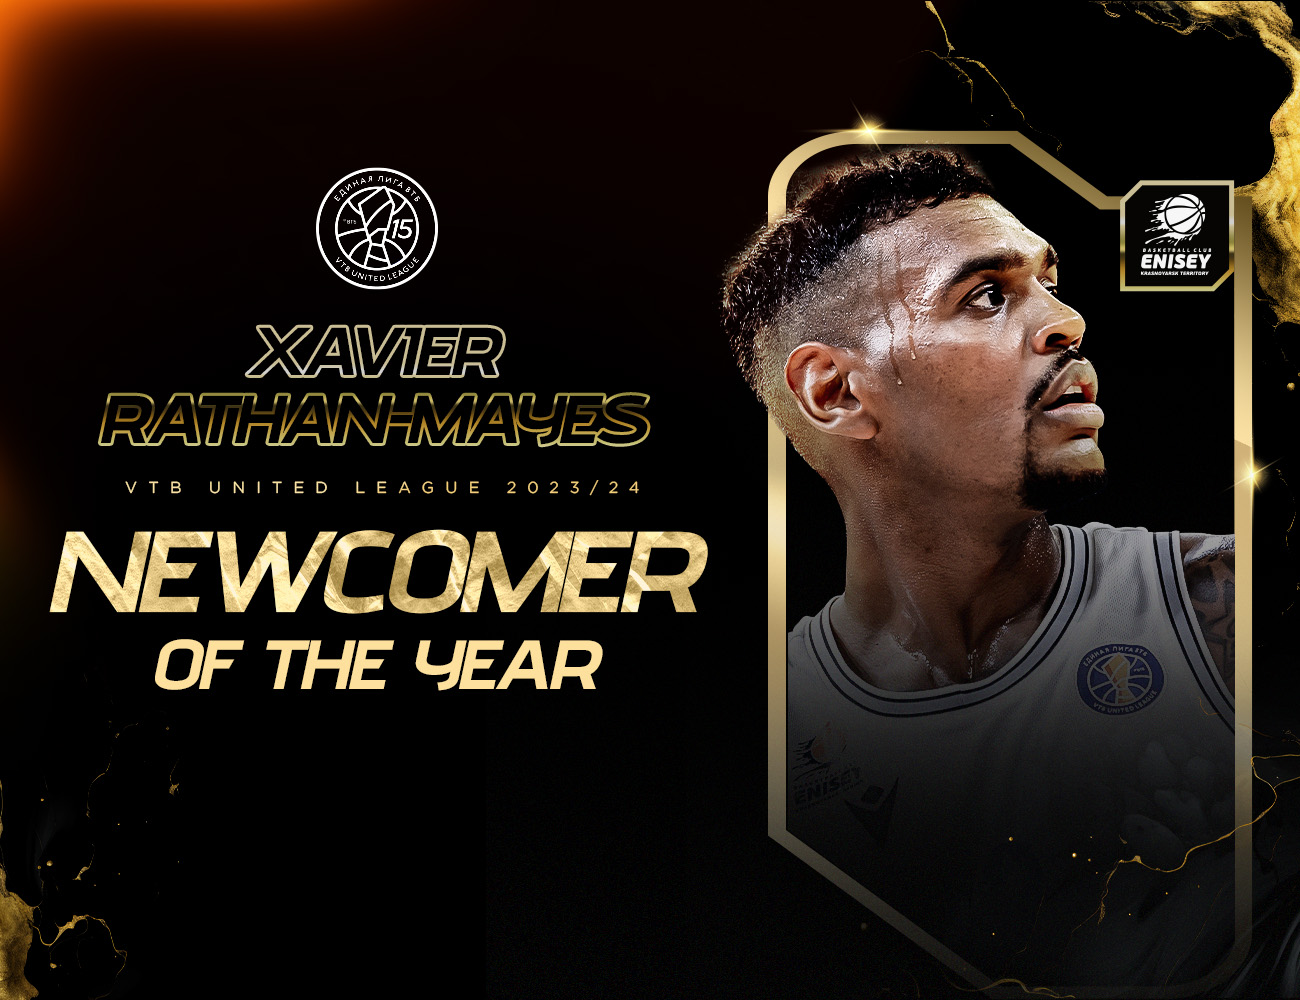 Xavier Rathan-Mayes is the Newcomer of the Year